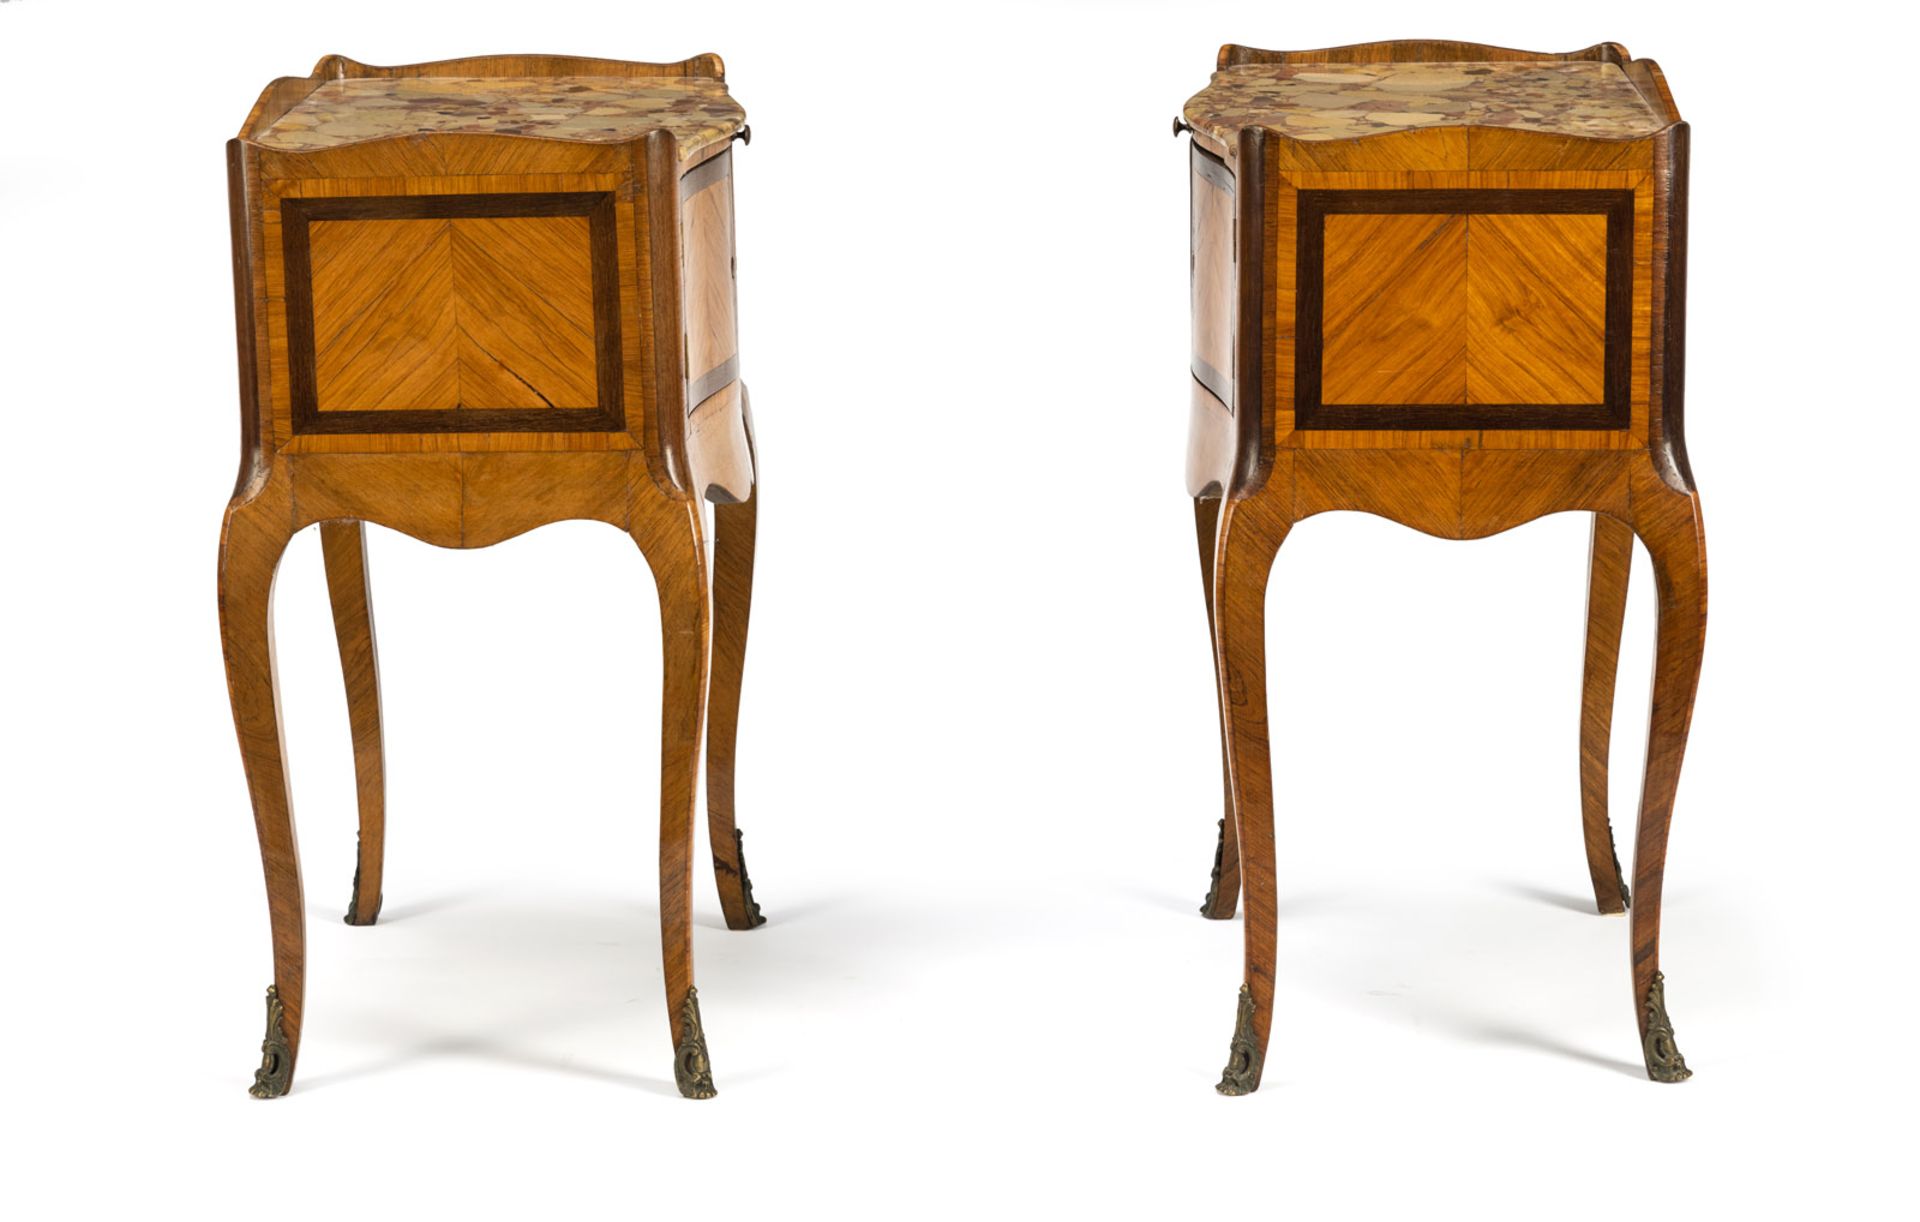 A PAIR OF FRENCH LOUIS-XV-STYLE ORMOLU MOUNTED TULIPWOOD AND AMARANTH OCCATIONAL TABLES - Image 4 of 9